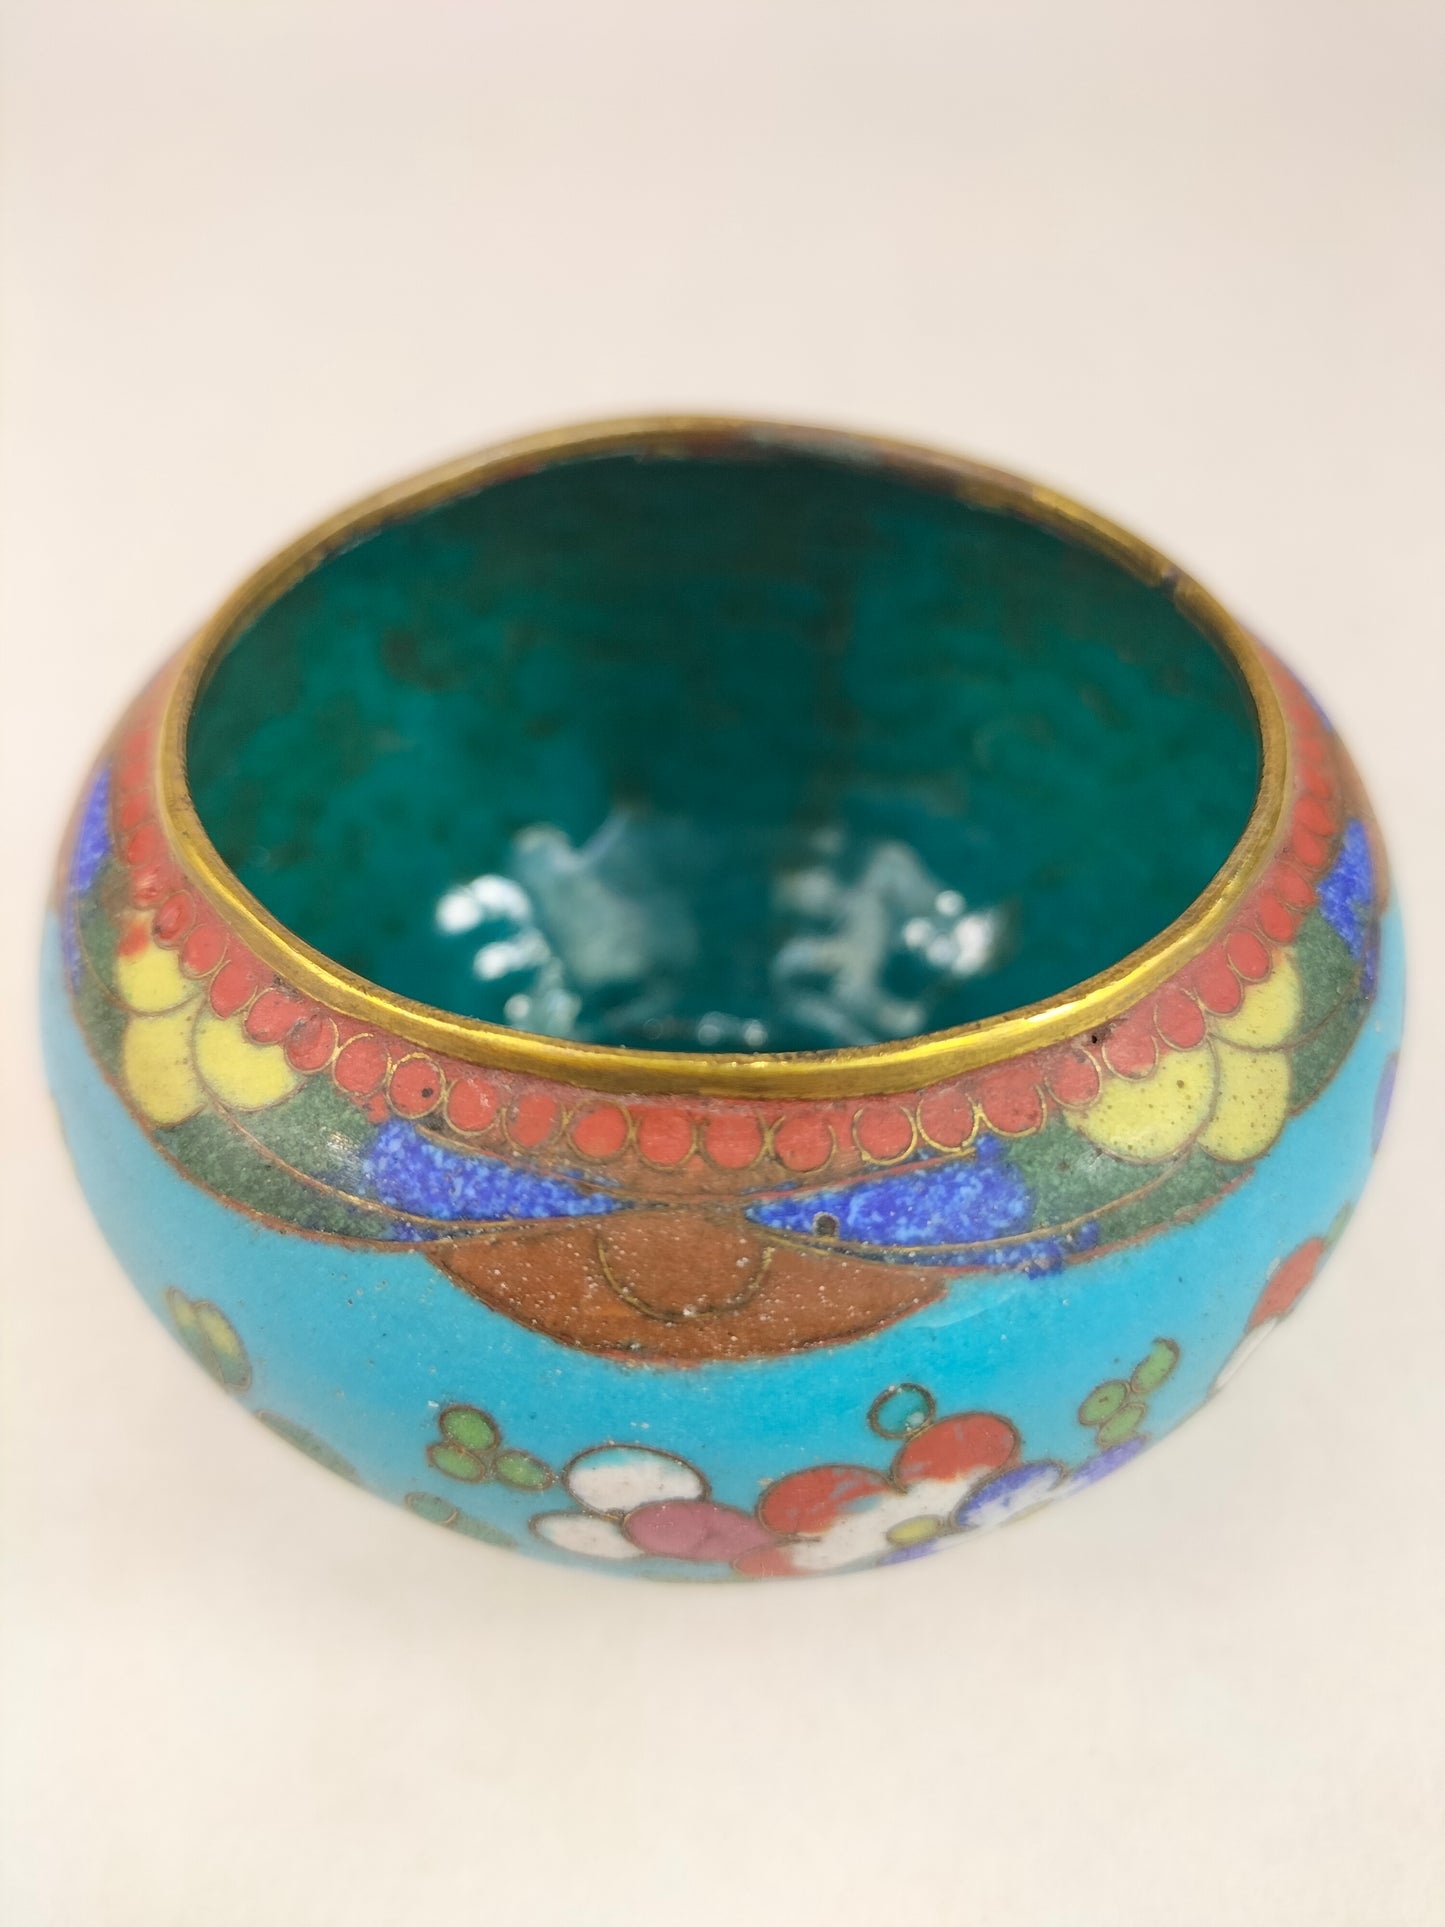 Antique Chinese cloisonne jar decorated with butterflies and floral motifs // Republic Period (1912-1949)